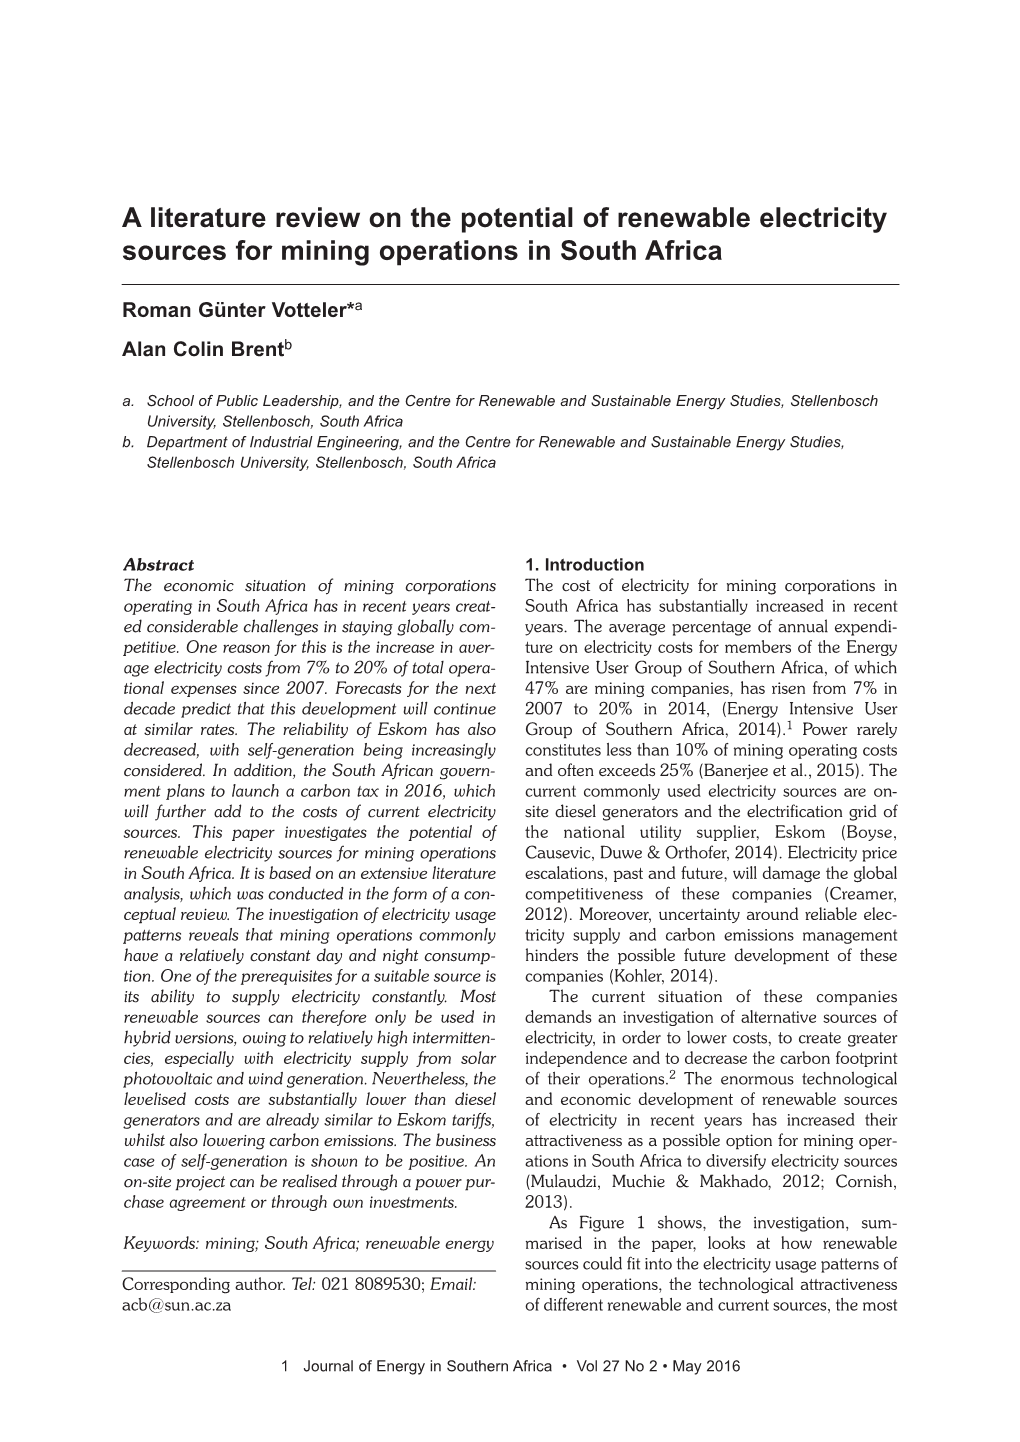 A Literature Review on the Potential of Renewable Electricity Sources for Mining Operations in South Africa